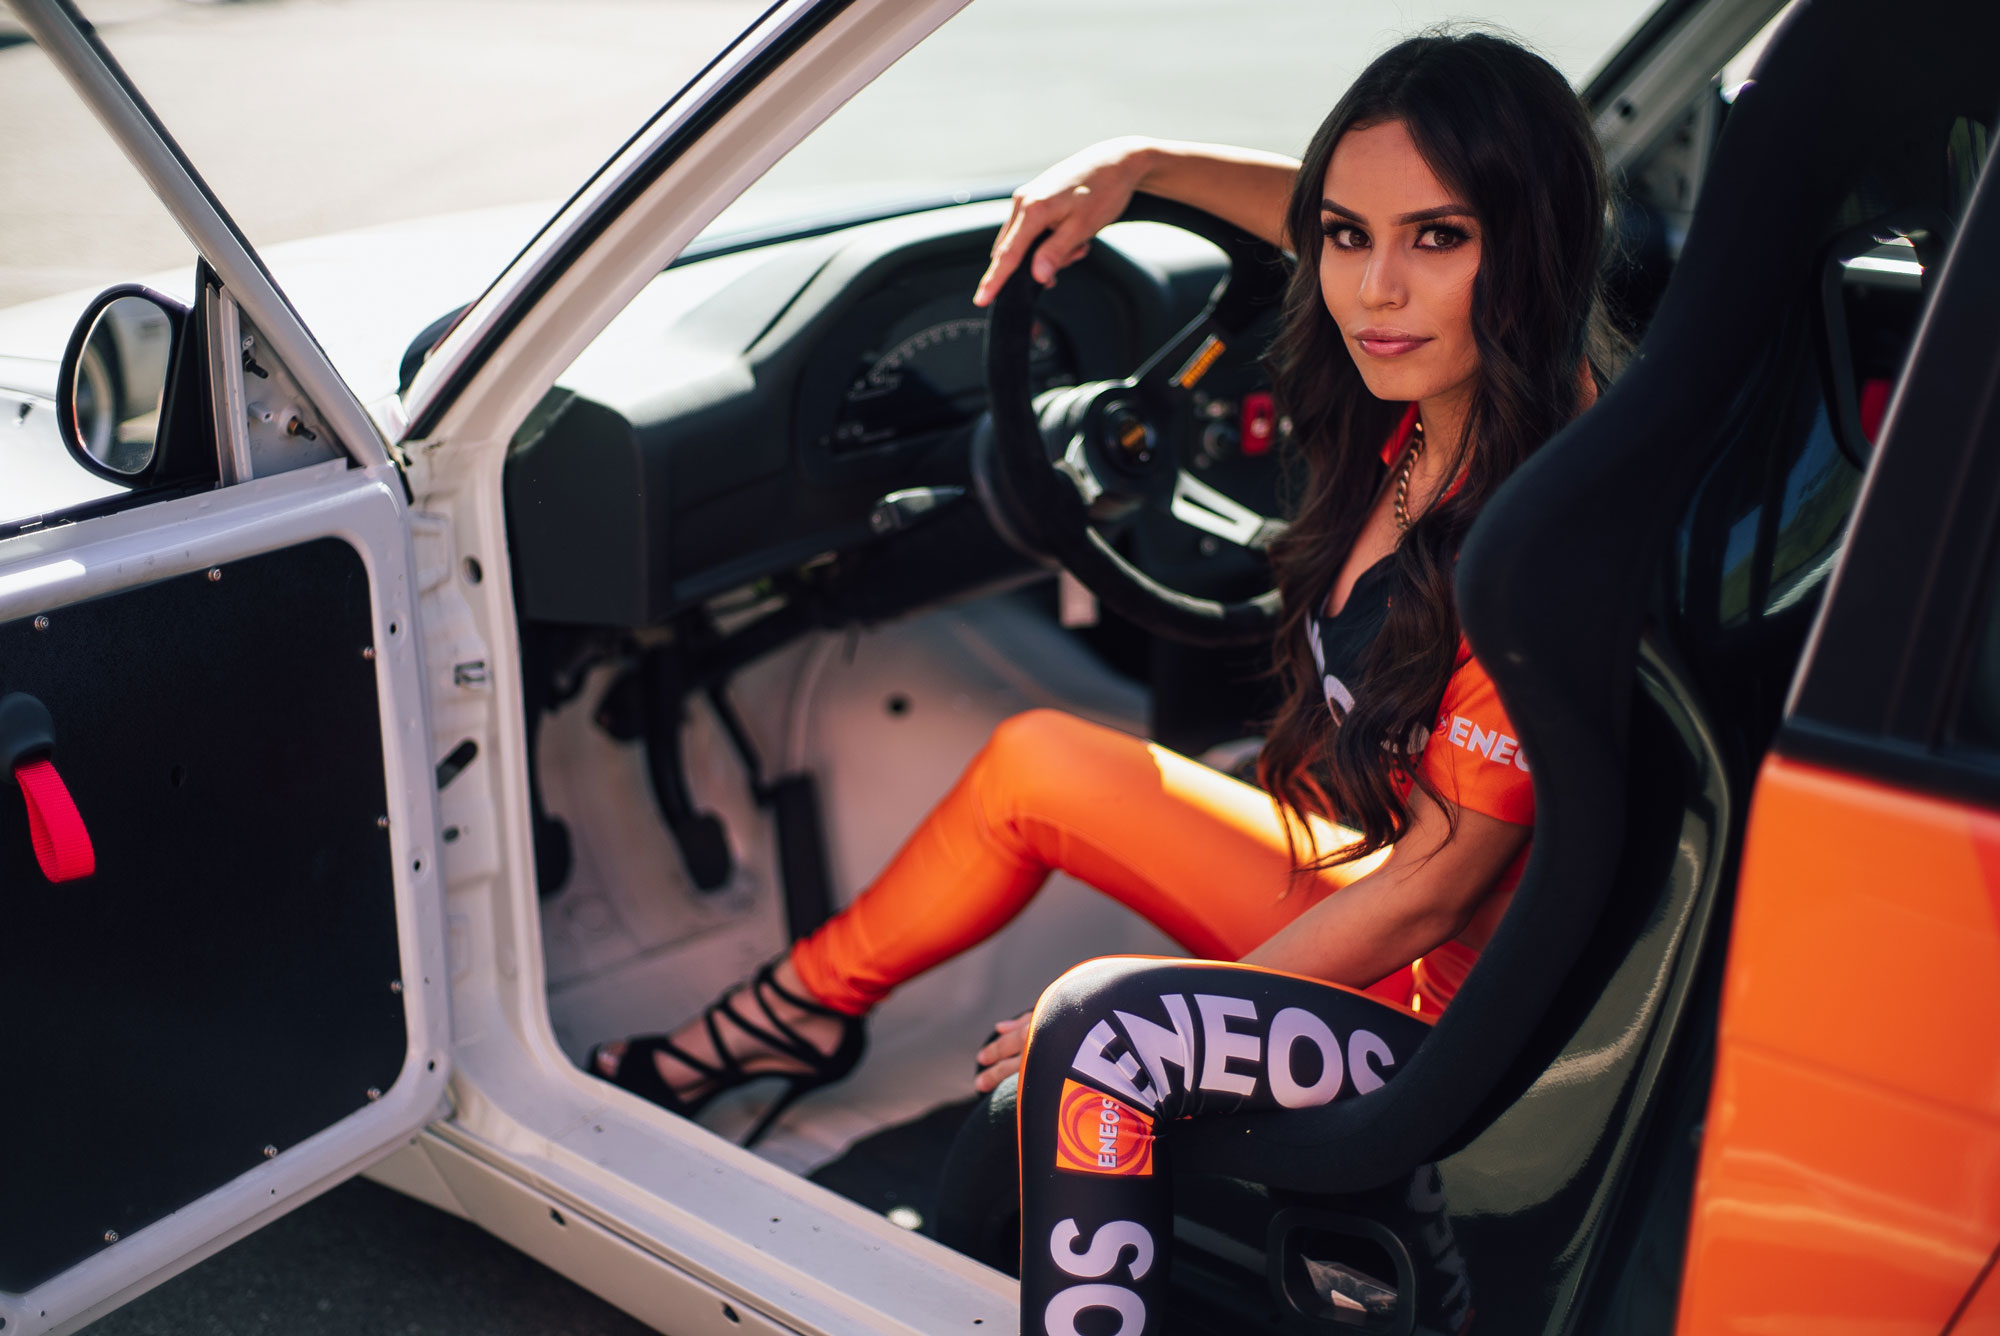 ENEOS girl in drivers seat